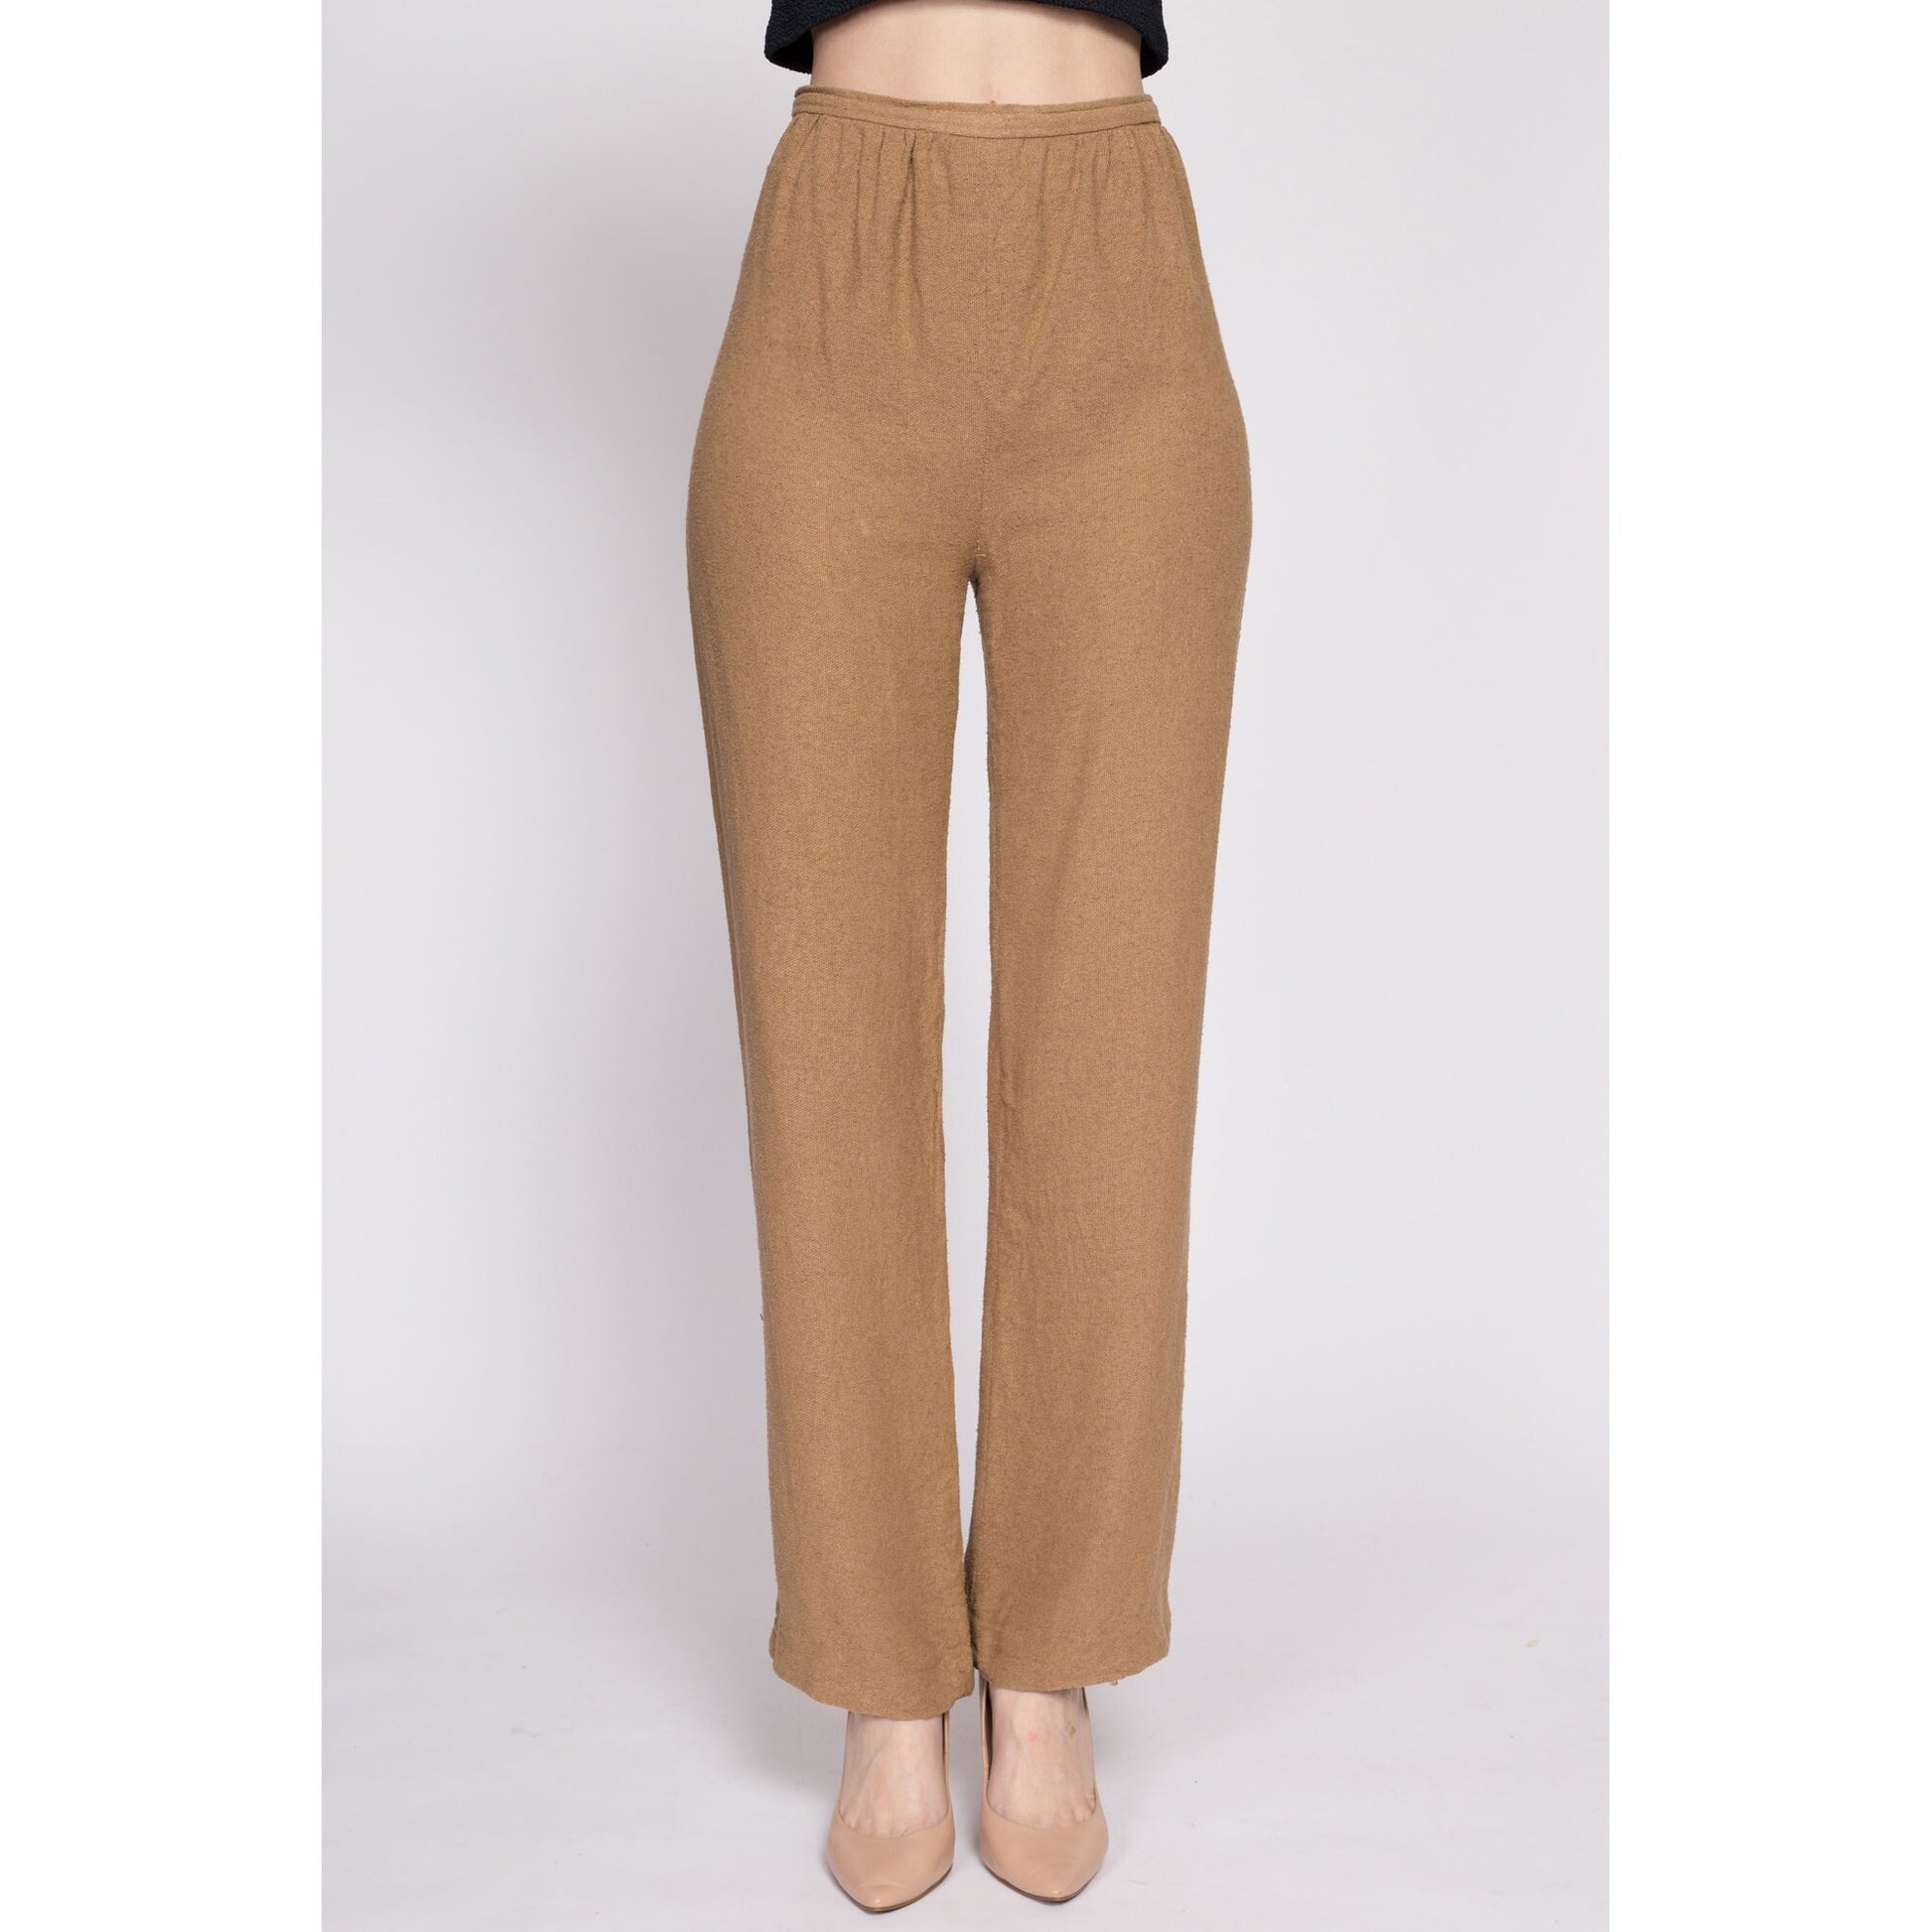 Brown Pants 80s Pants Womens Trousers High Waisted Pants Baggy